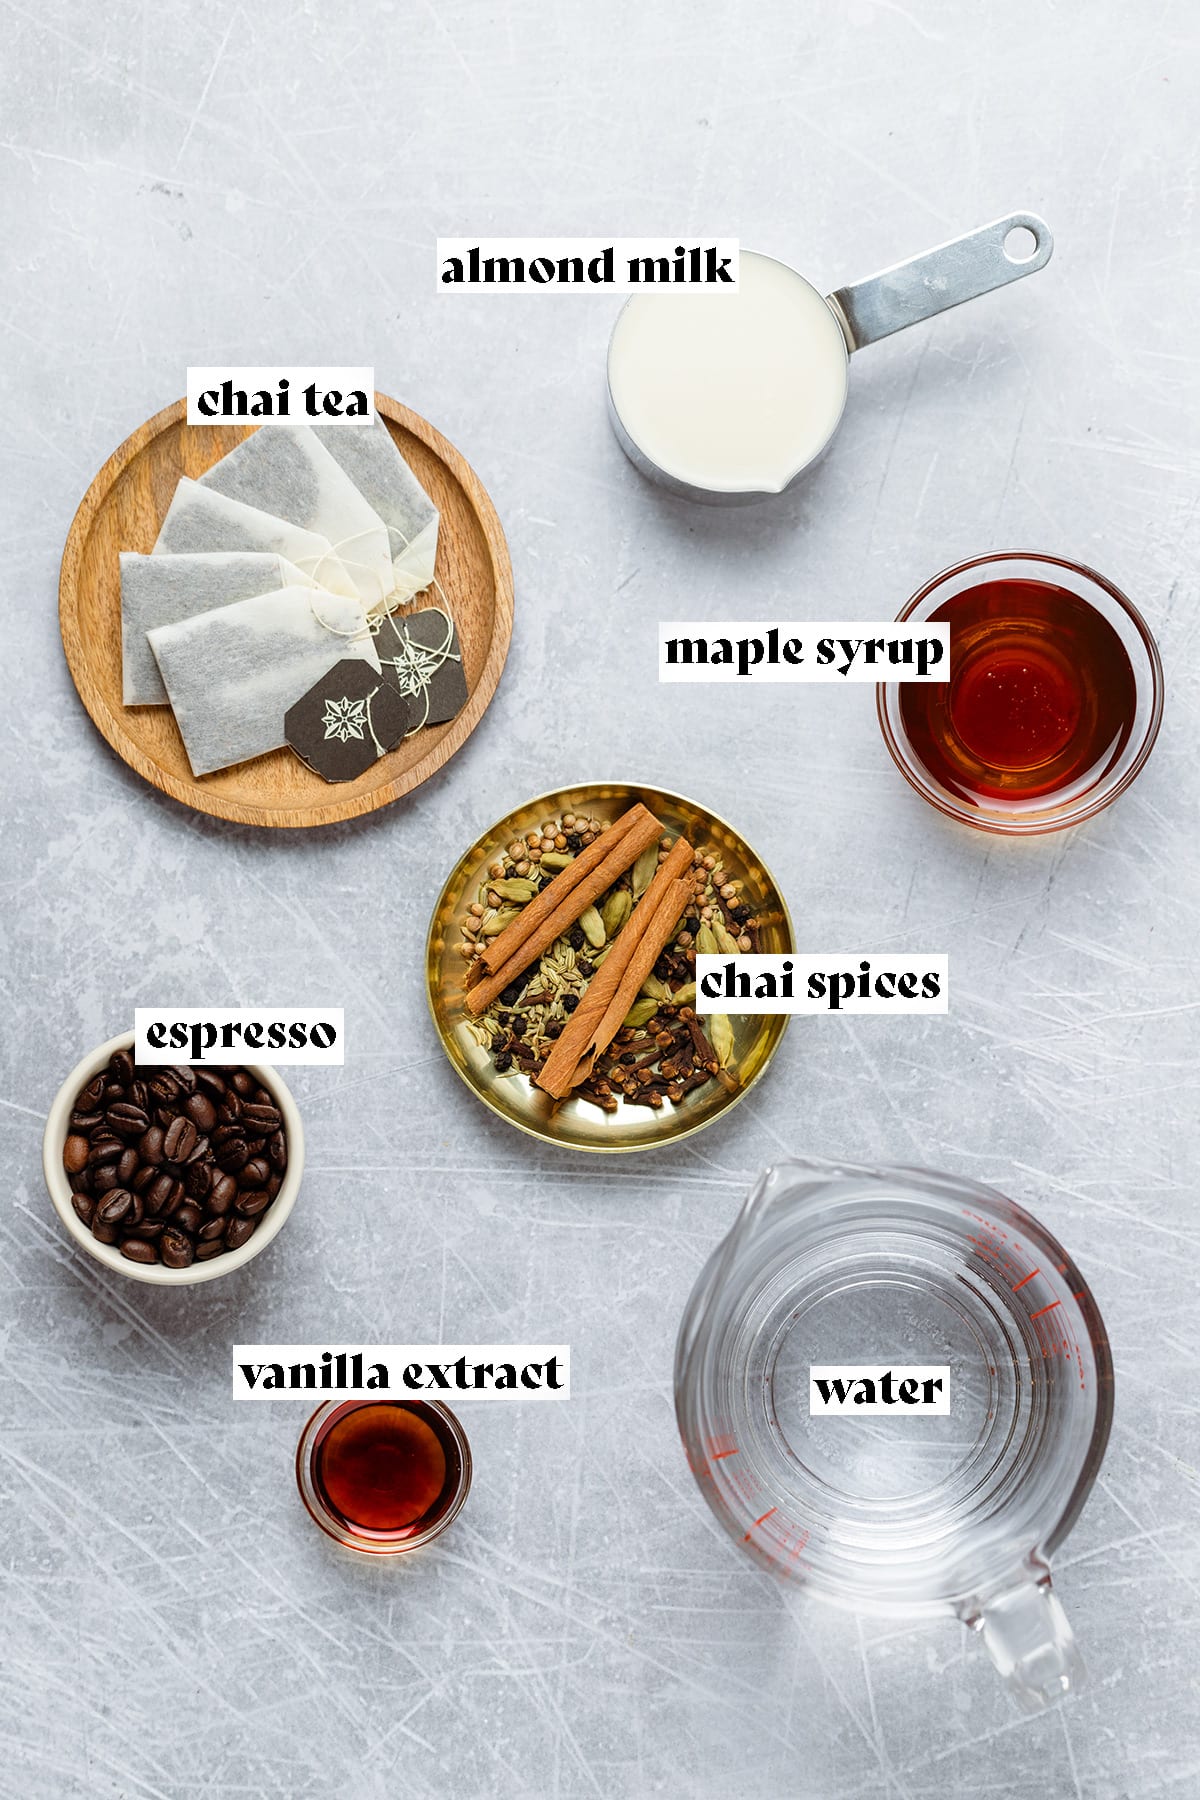 Ingredients for dirty chai latte laid out including spices, teabags, and coffee beans.